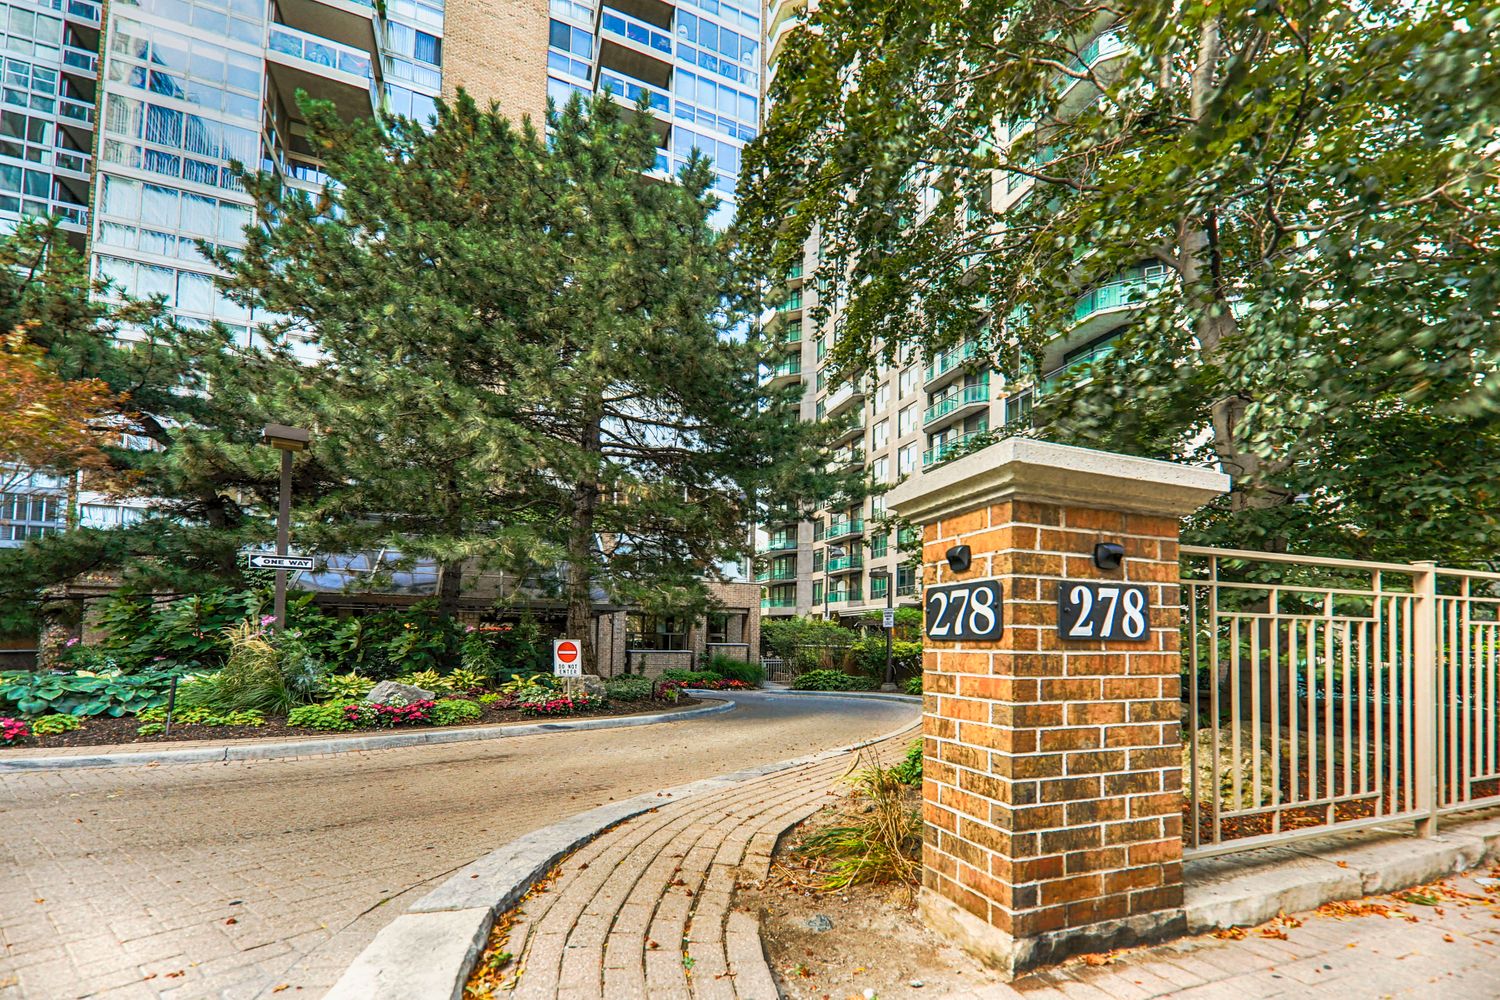 278 Bloor Street E. Rosedale Glen is located in  Downtown, Toronto - image #4 of 4